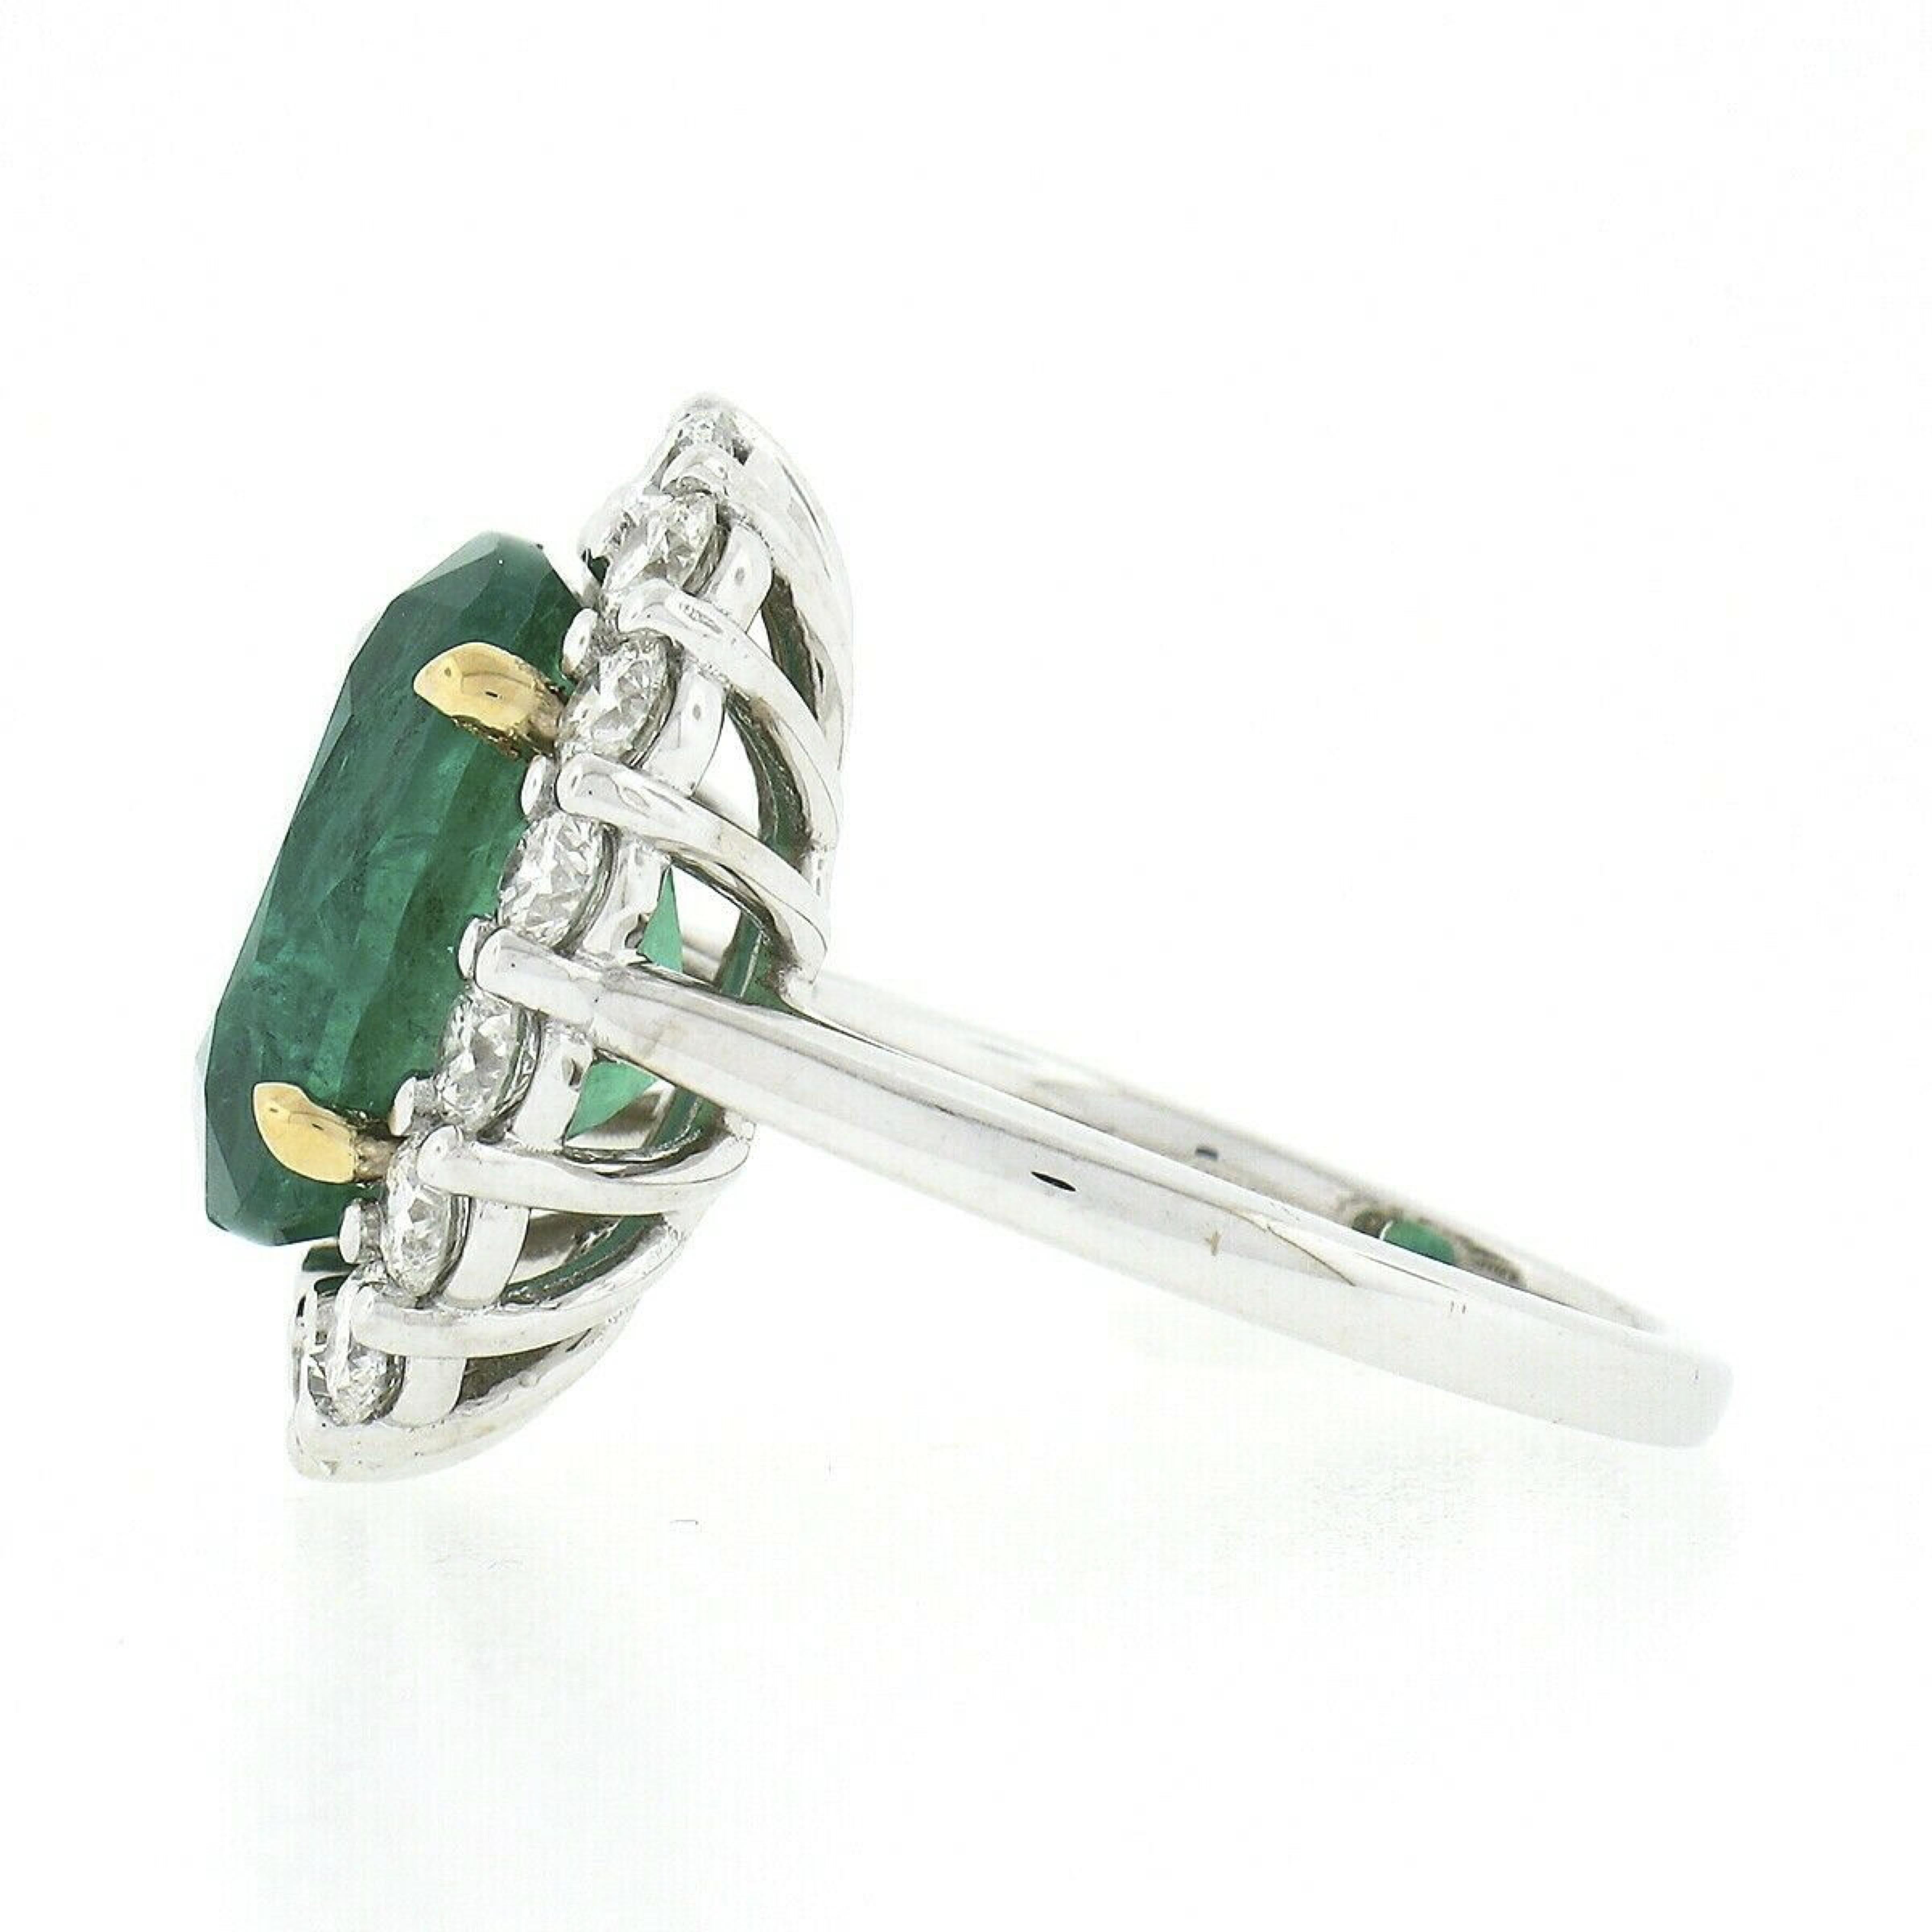 New 18k TT Gold 7.94ct GIA Oval Emerald w/ Diamond Halo Engagement Cocktail Ring 2